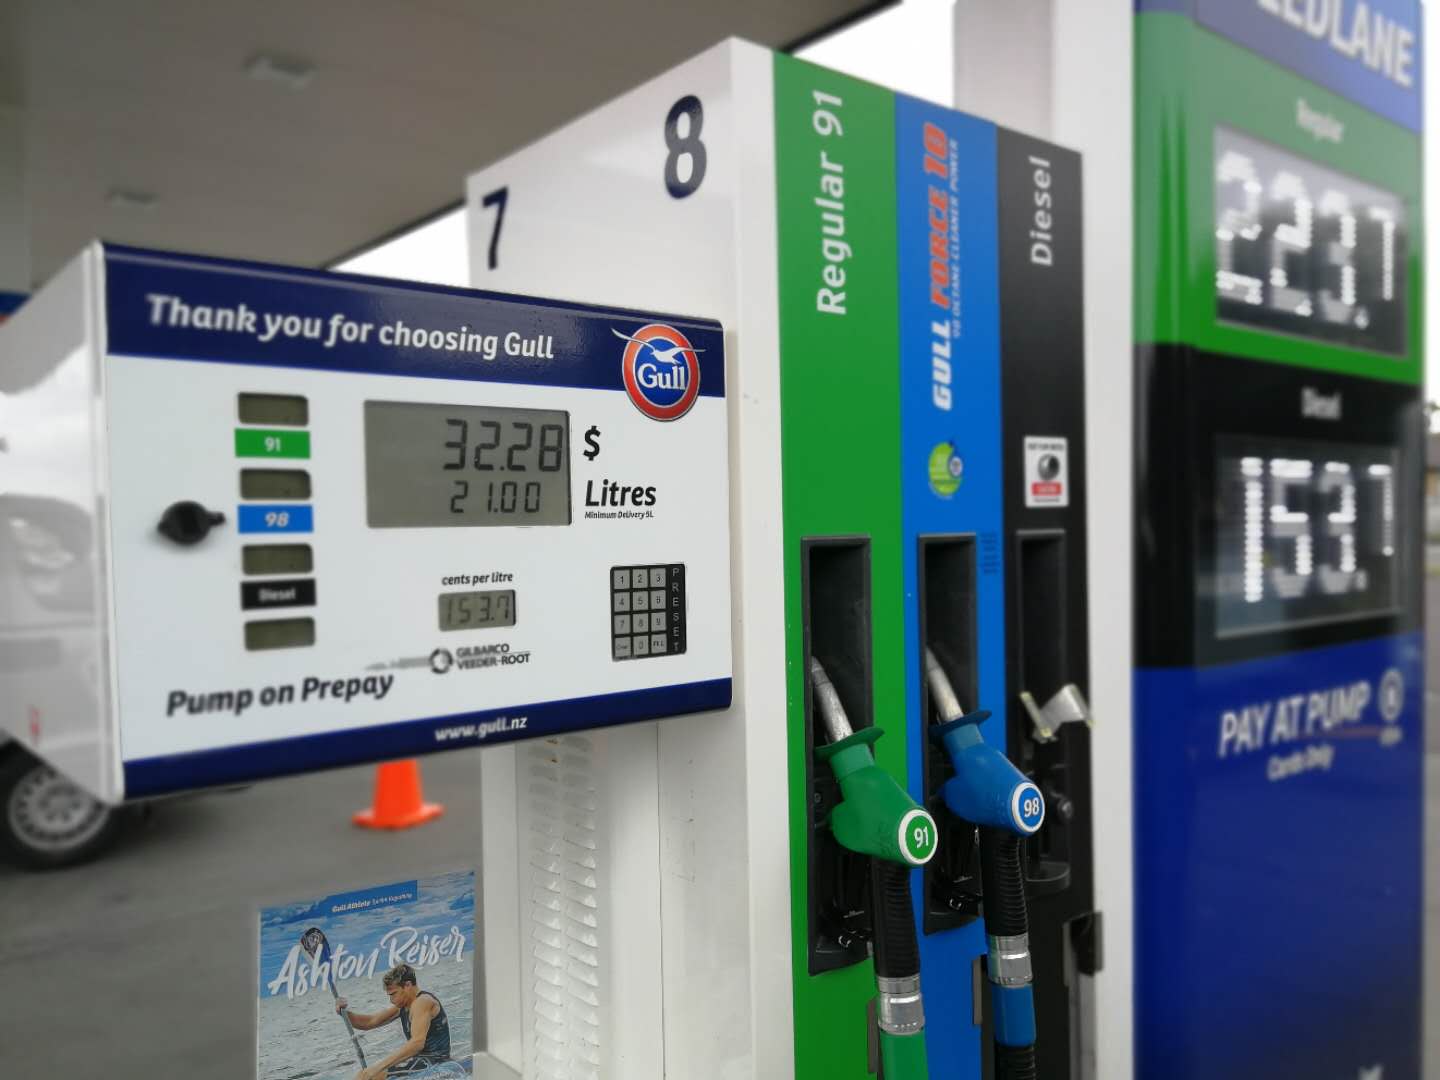 gull-petrol-station-pumps-with-display